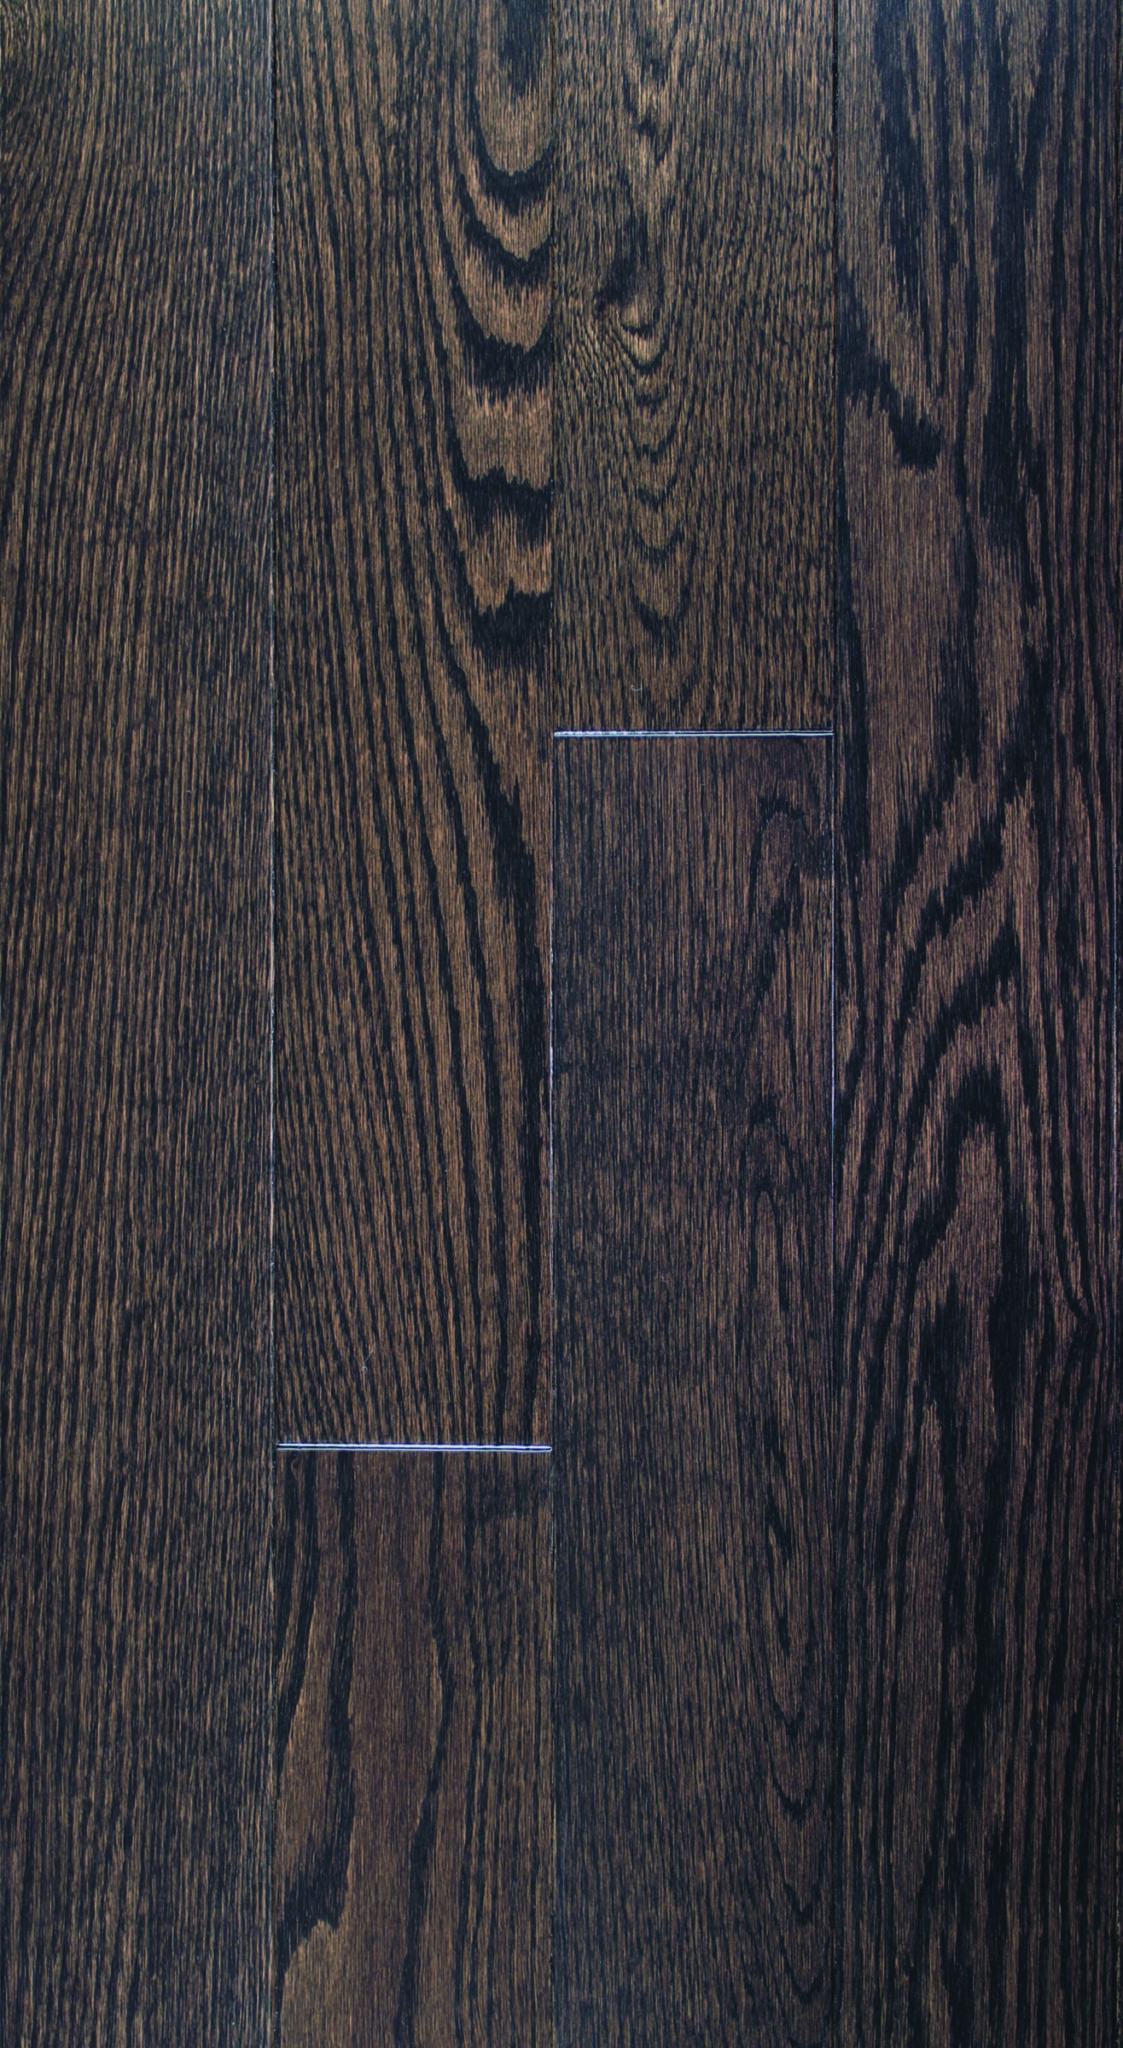 up-close photo swatch of Red Oak Brownie hardwood flooring from our Classic collection